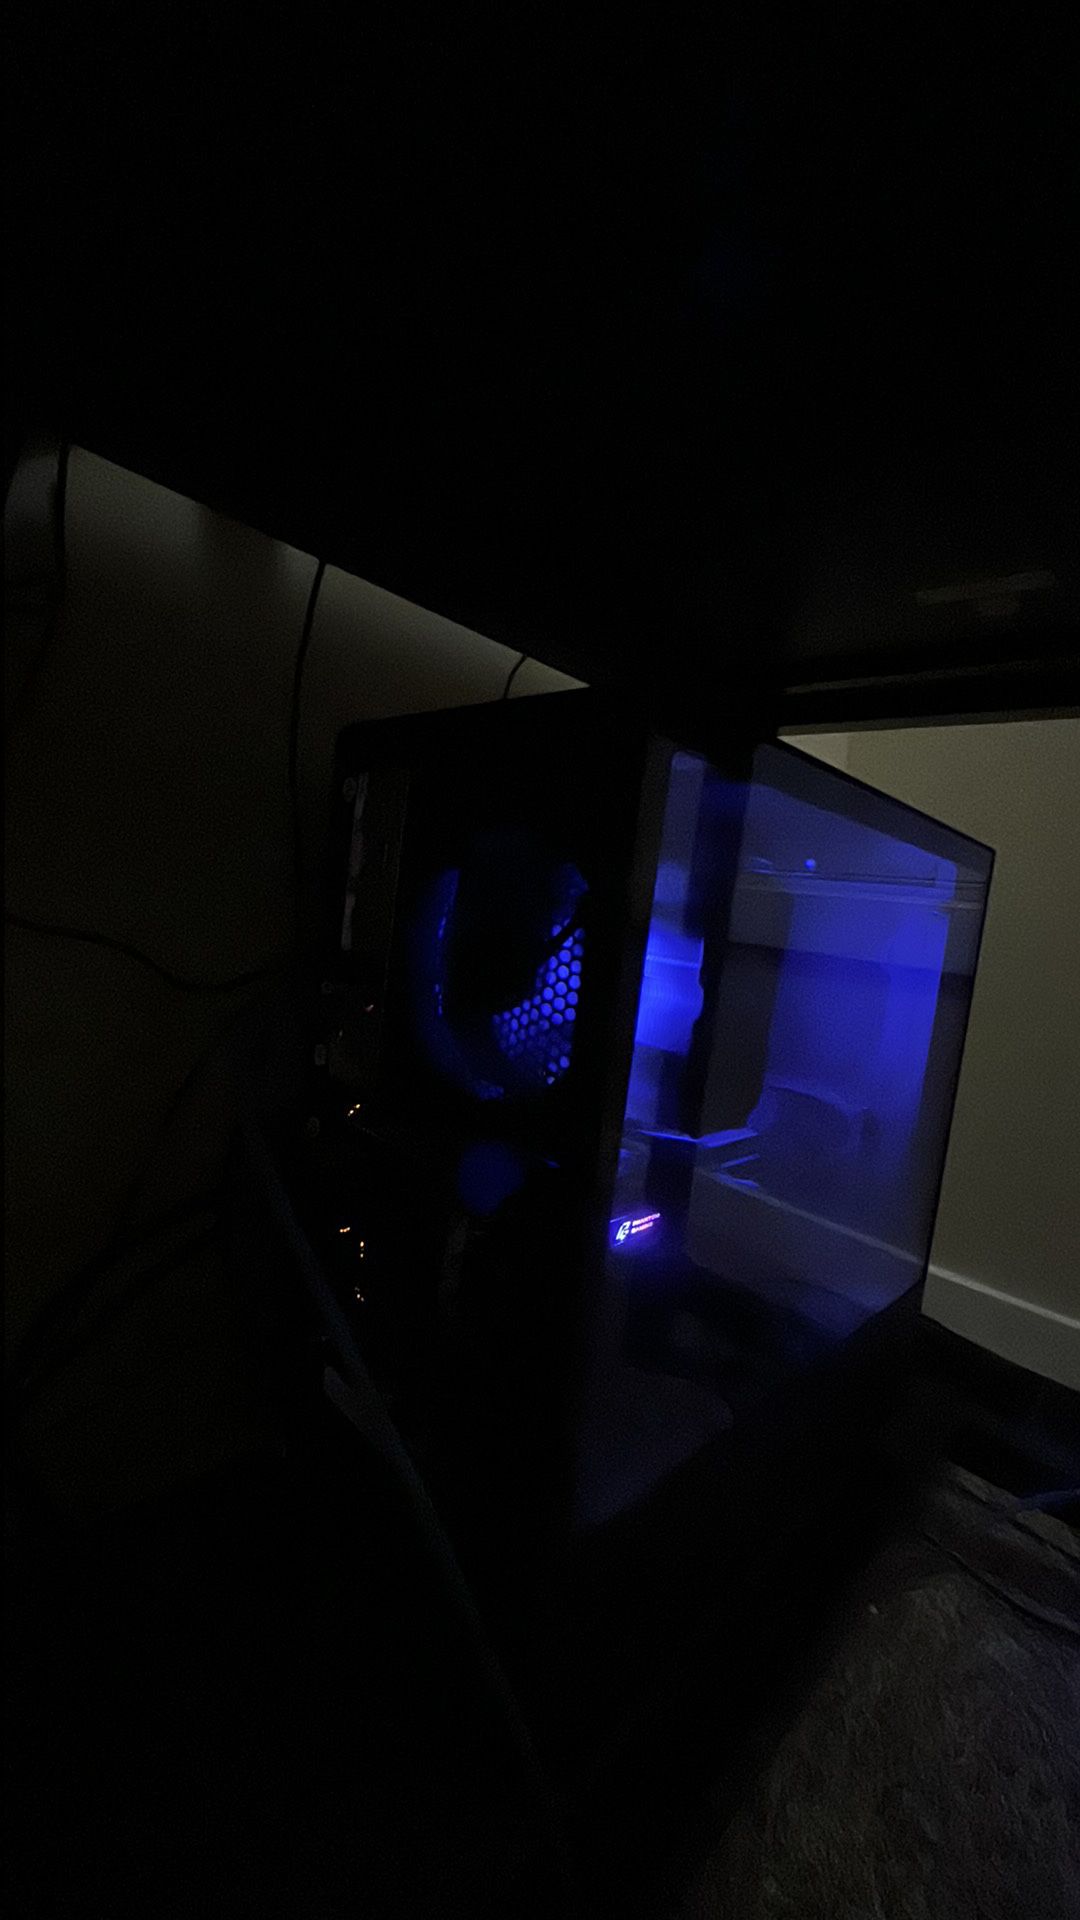 Nzxt Gaming Pc